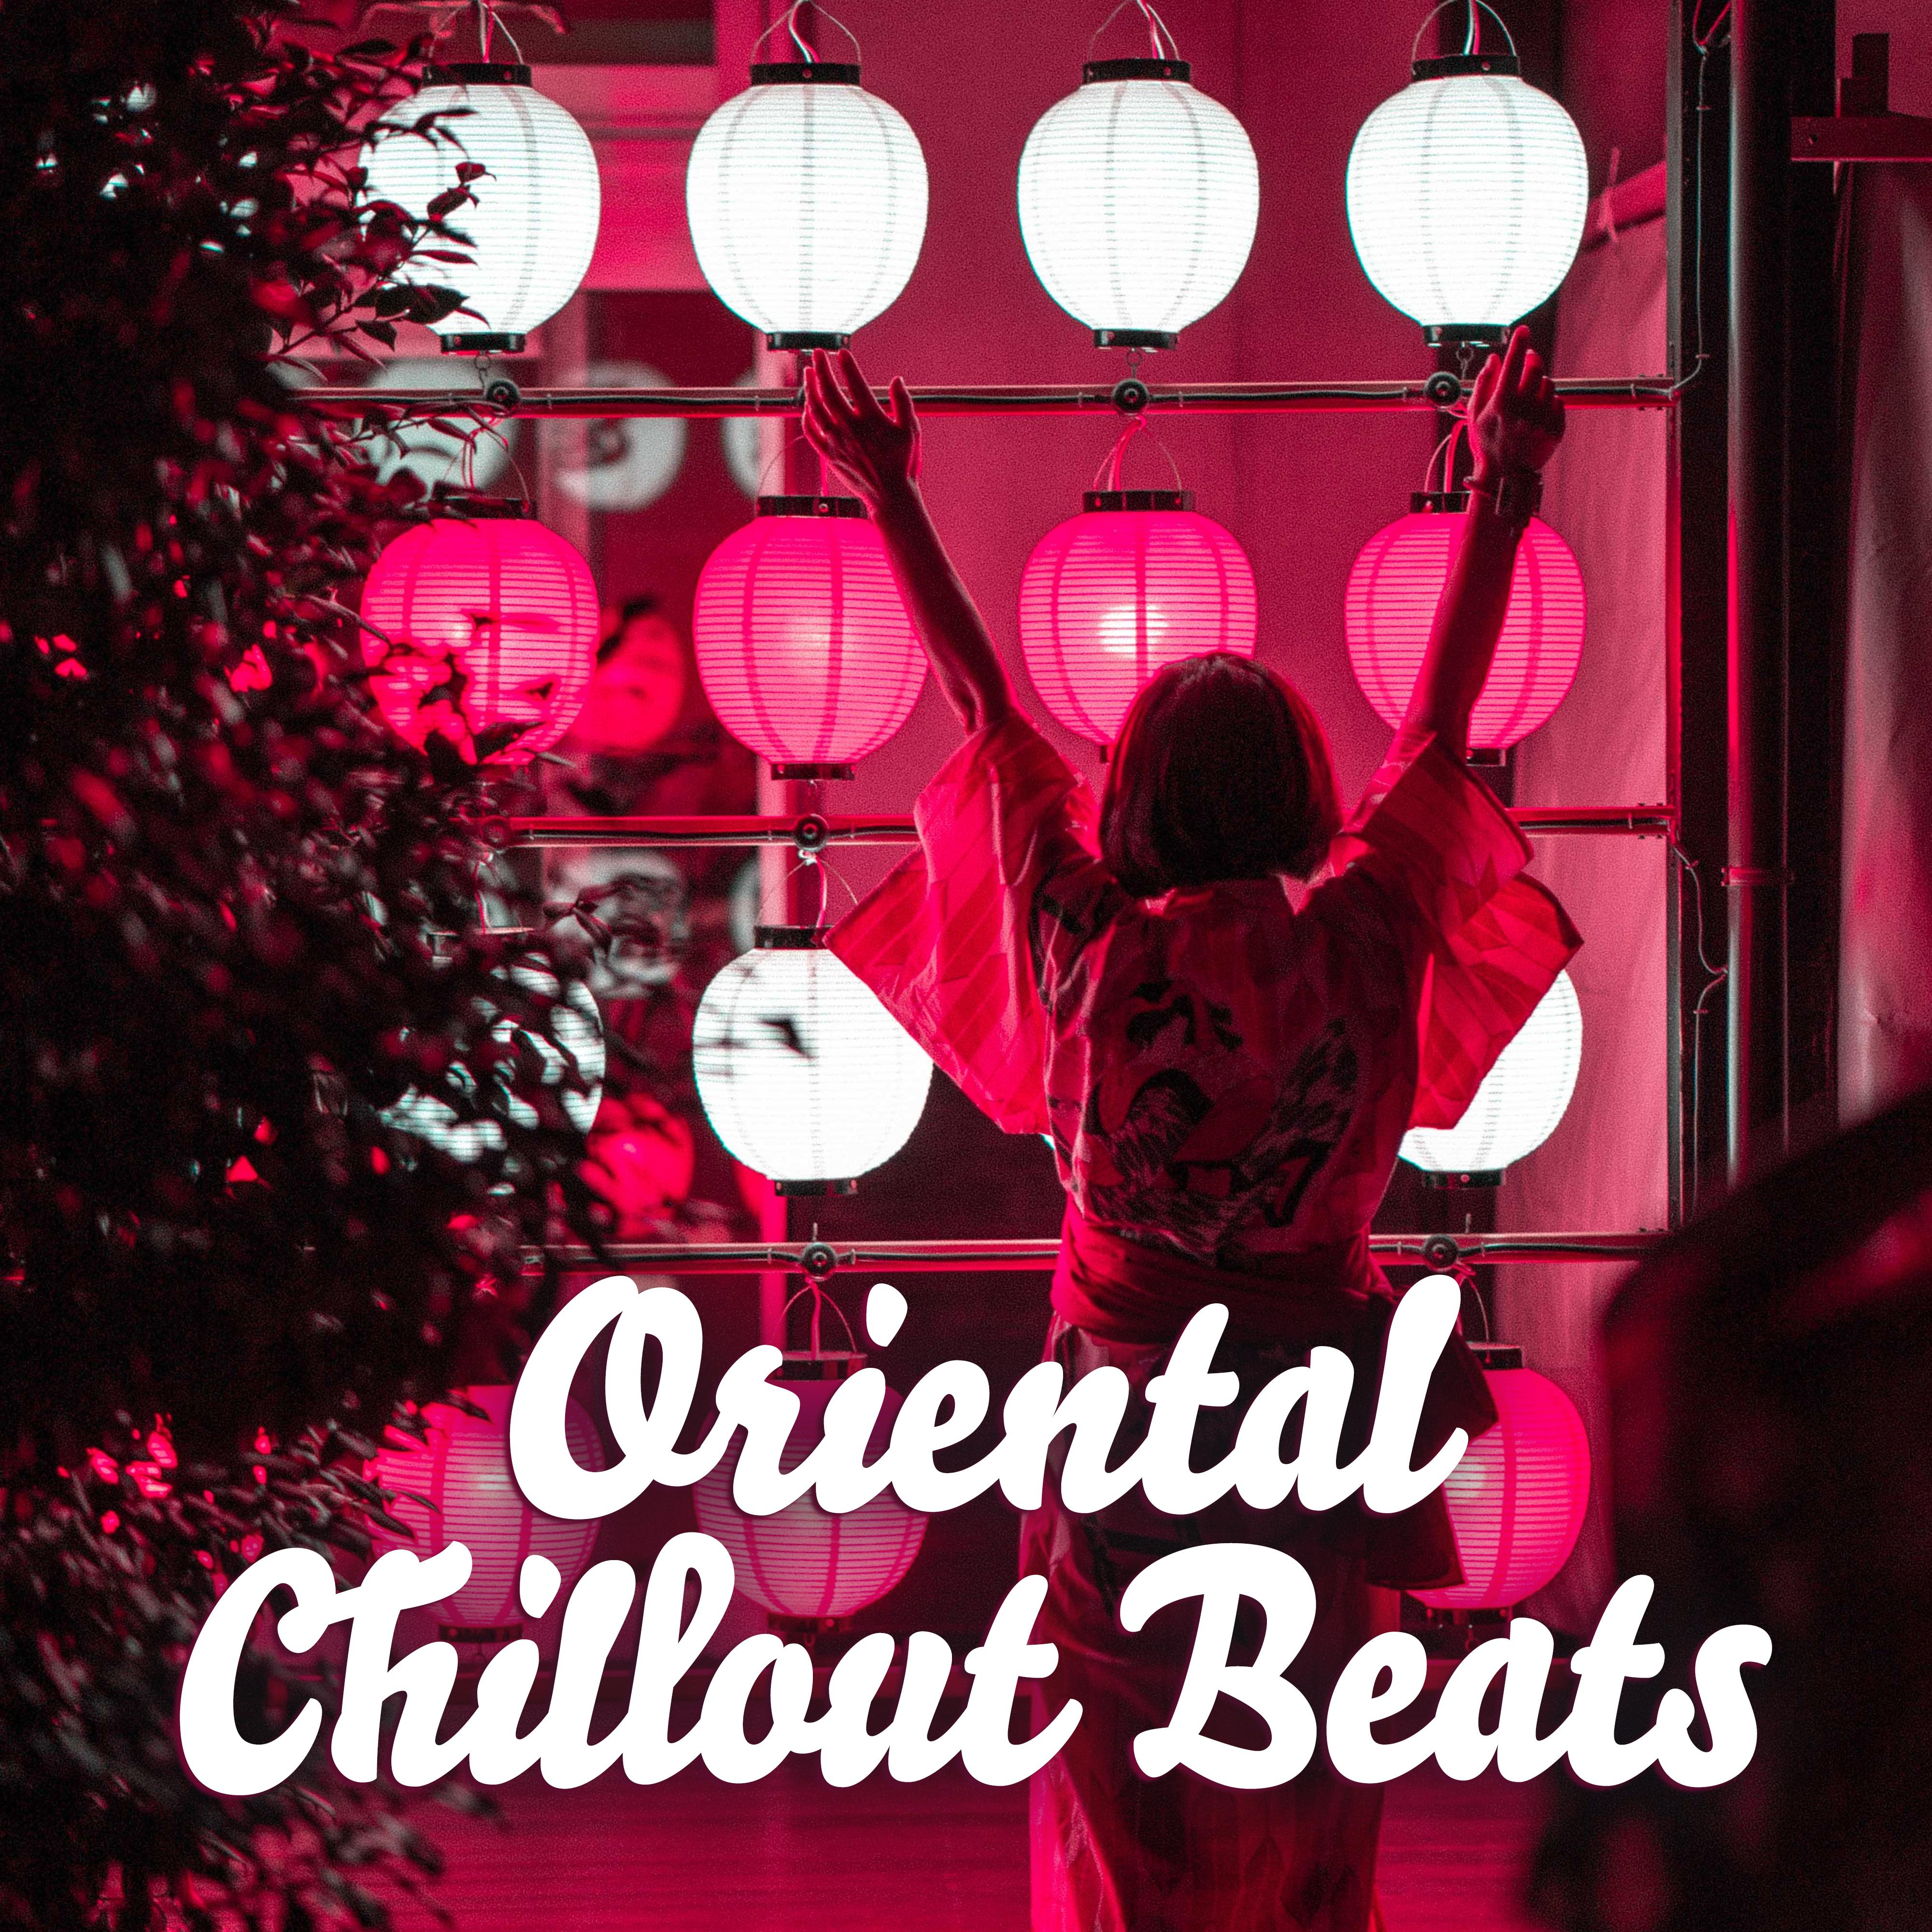 Oriental Chillout Beats: 15 Electronic Tracks for Yoga & Meditation, Soft Relaxation Vibes